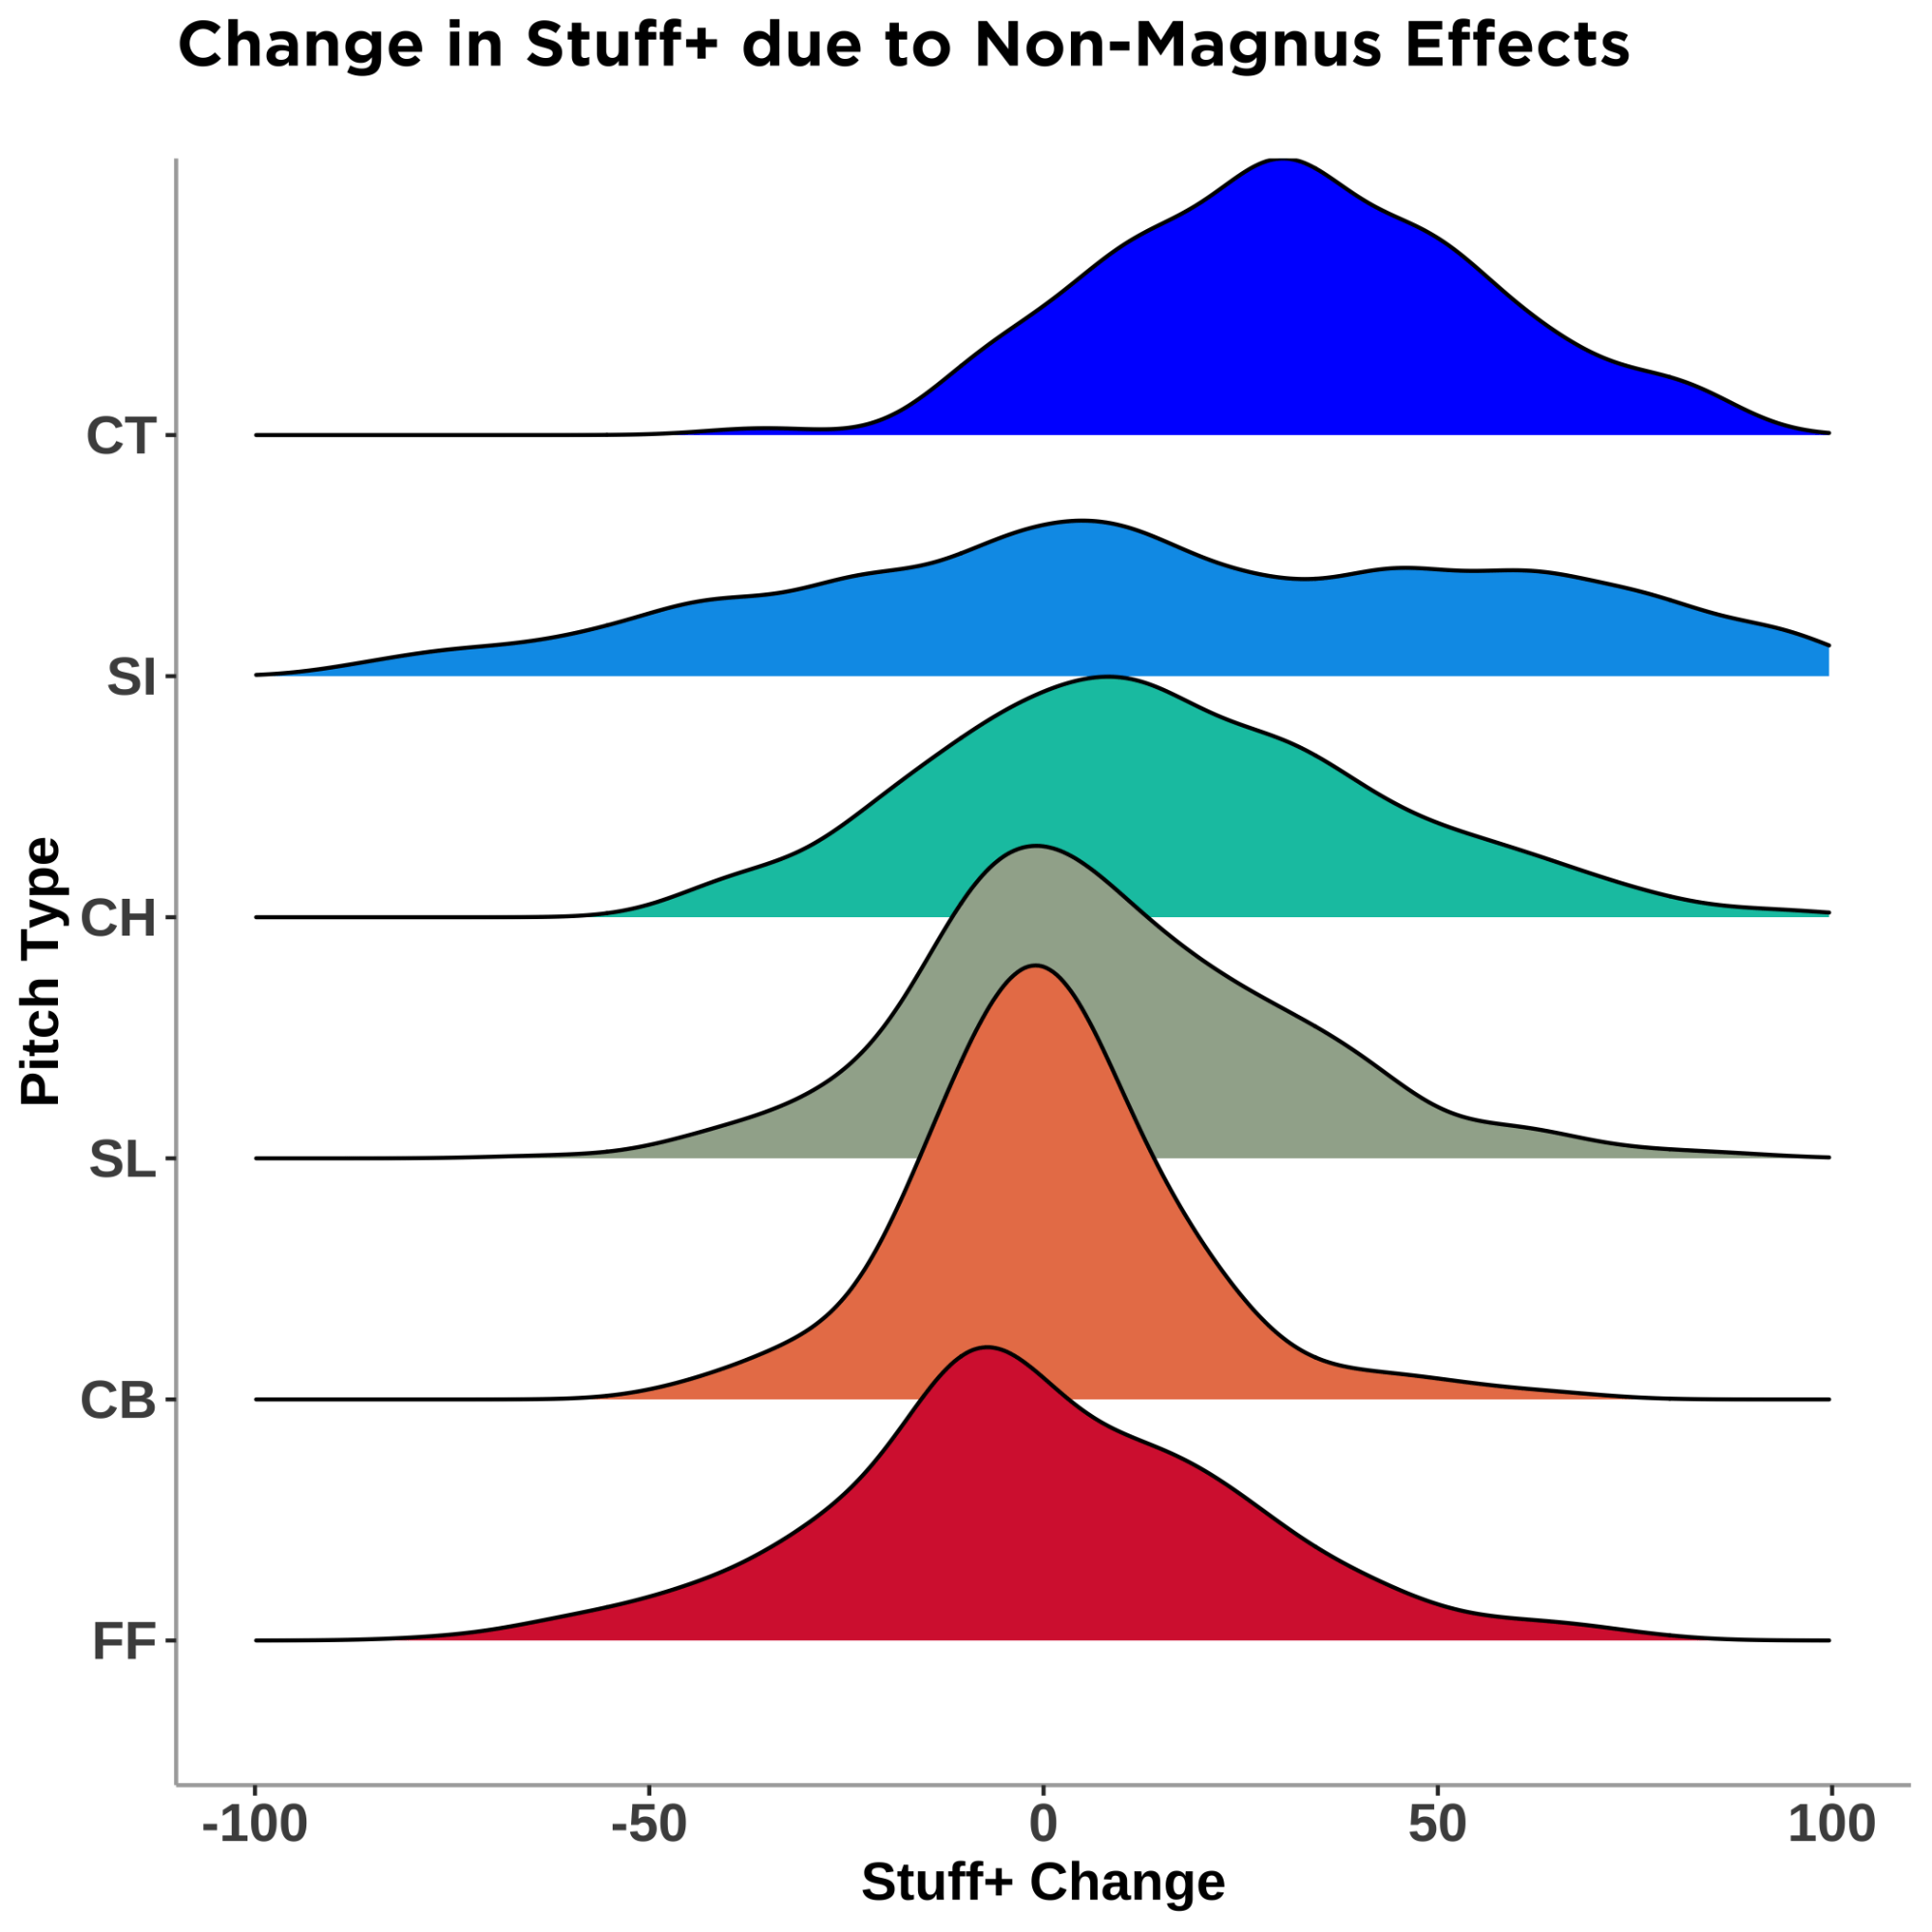 Change in Stuff+ due to non magnus effects